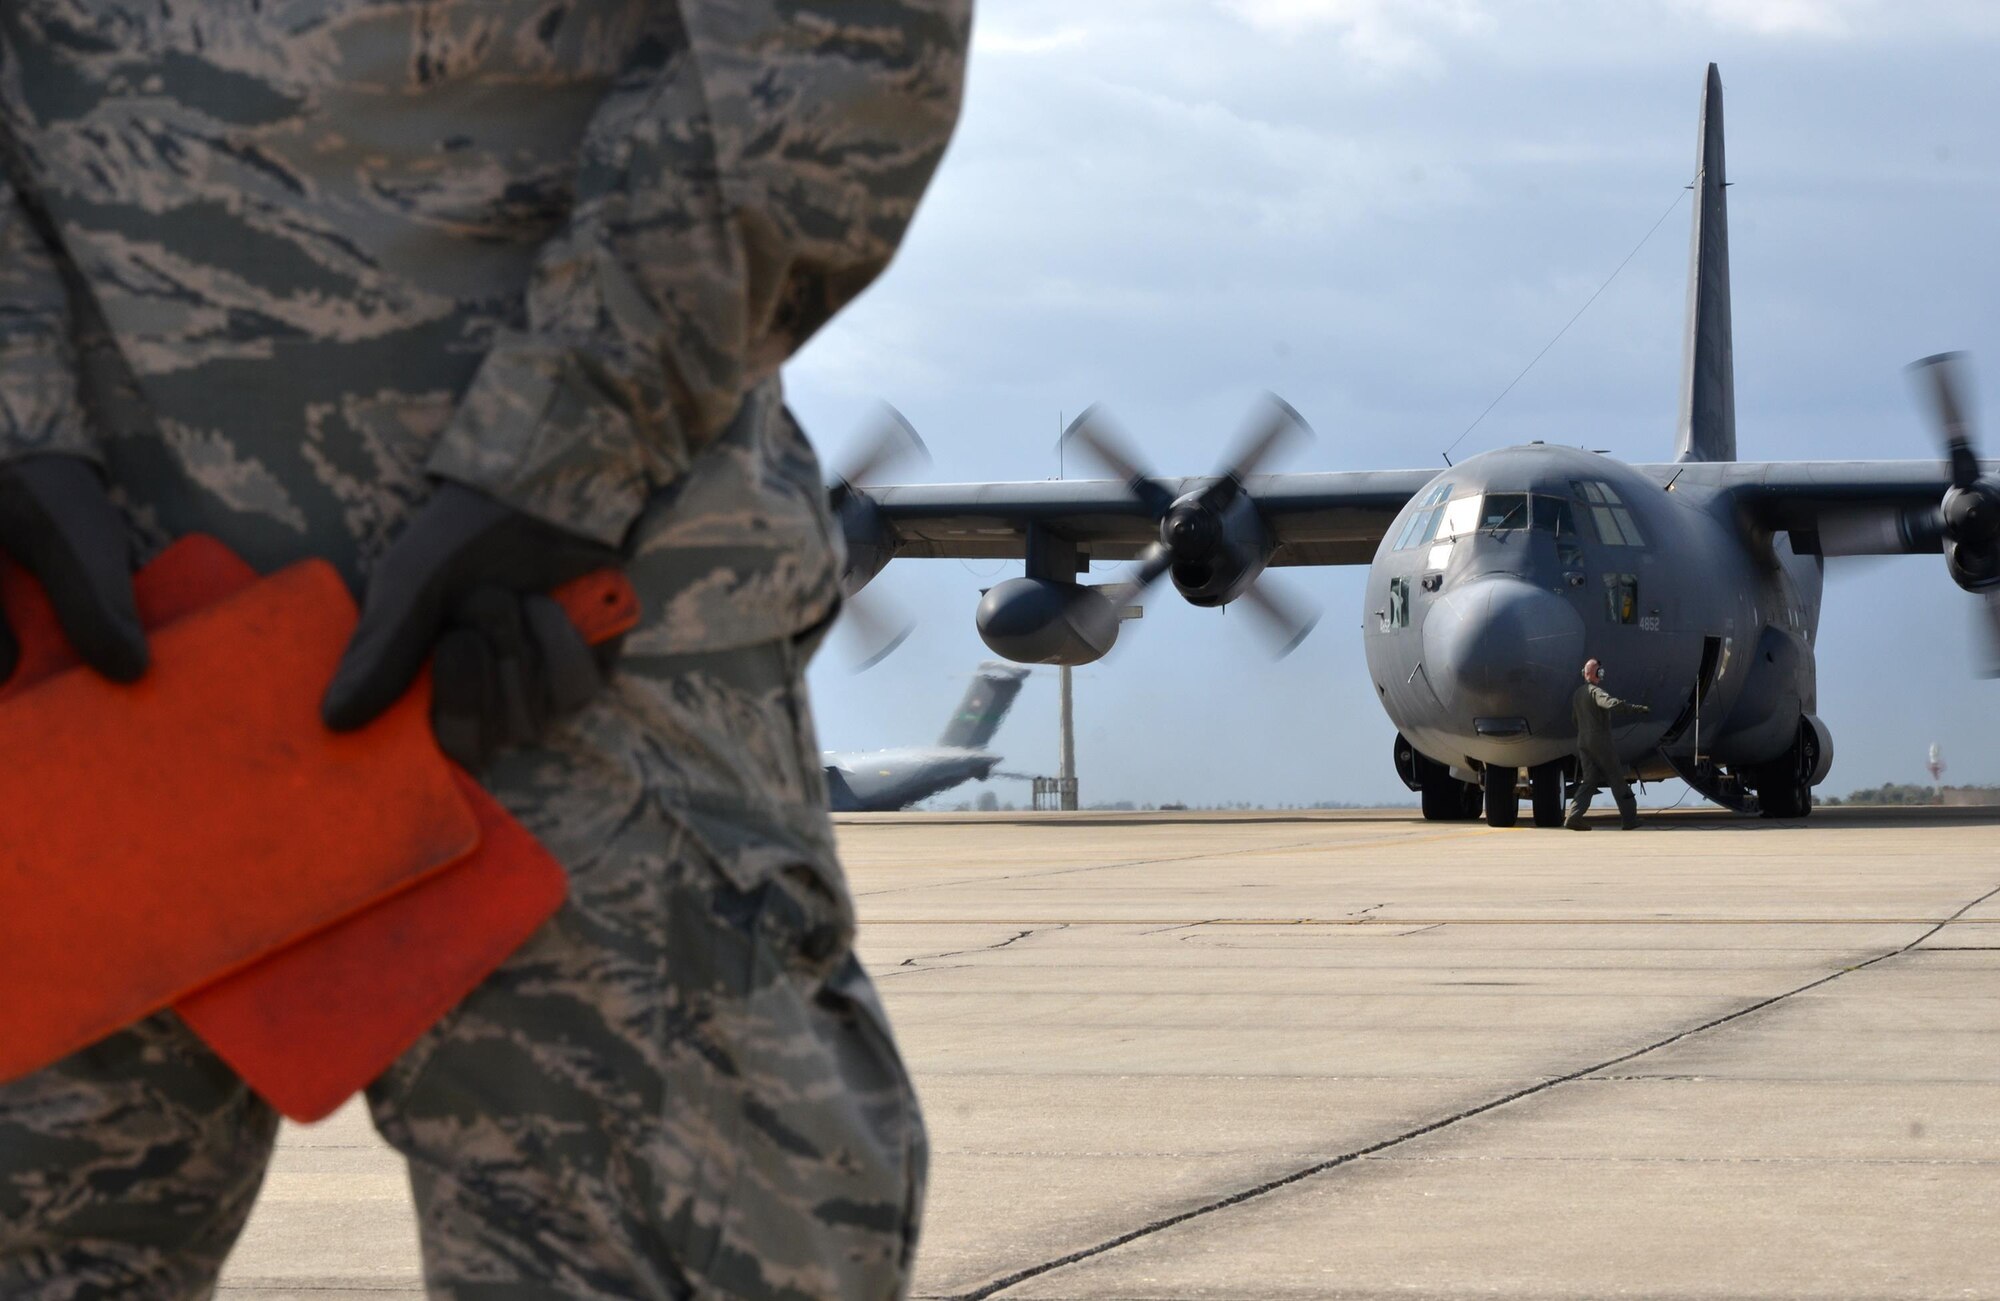 Senior Airman Liam Miner, 720th Aircraft Maintenance Squadron dedicated crew chief, stands by ready to marshall King 52, the first HC-130 configured for Air Force rescue, down the Patrick Air Force Base, Florida, taxiway for the last time March 6, 2017. King 52 will retire at Davis-Monthan Air Force Base, Arizona, with more than 50 years of service. (U.S. Air Force photo/Tech. Sgt. Lindsey Maurice)